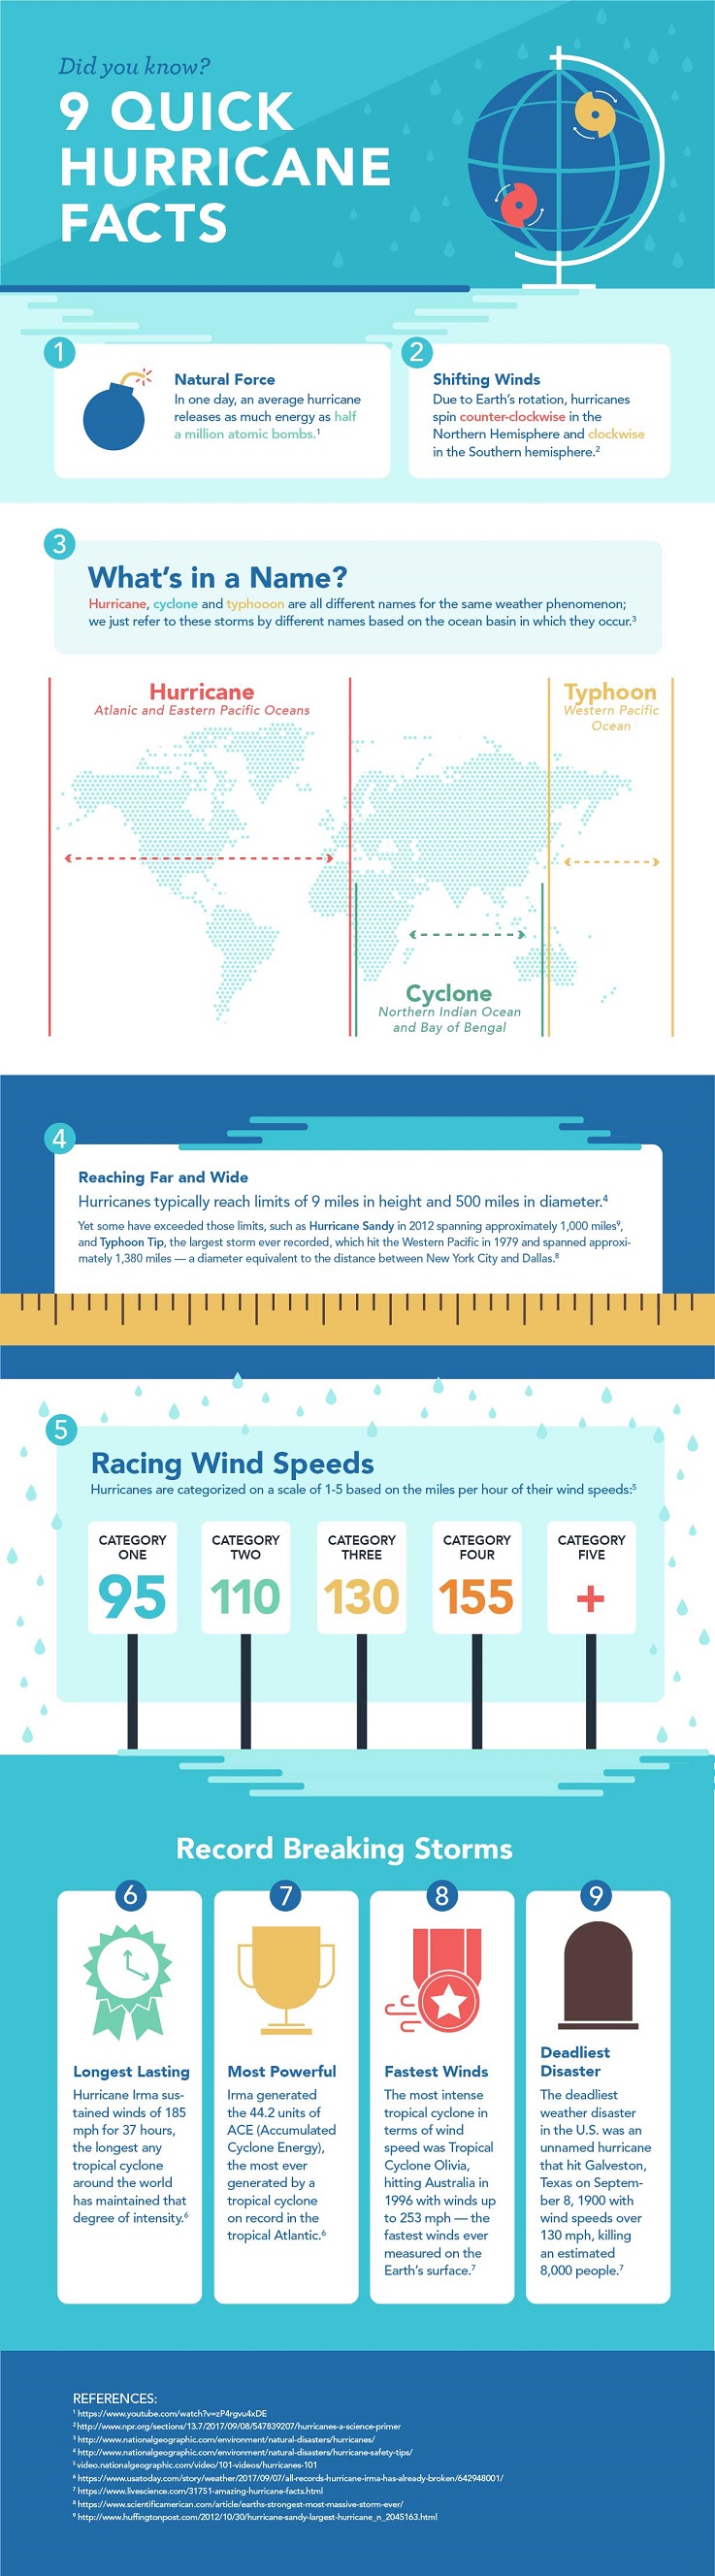 This infographic identifies key facts about hurricanes, a powerful natural force releasing as much energy as half a million atomic bombs in one day. These storms are referred to as hurricanes, cyclones or typhoons based on which ocean basin they occur in and are categorized on a 1-5 scale depending on the miles per hour of the wind speeds.